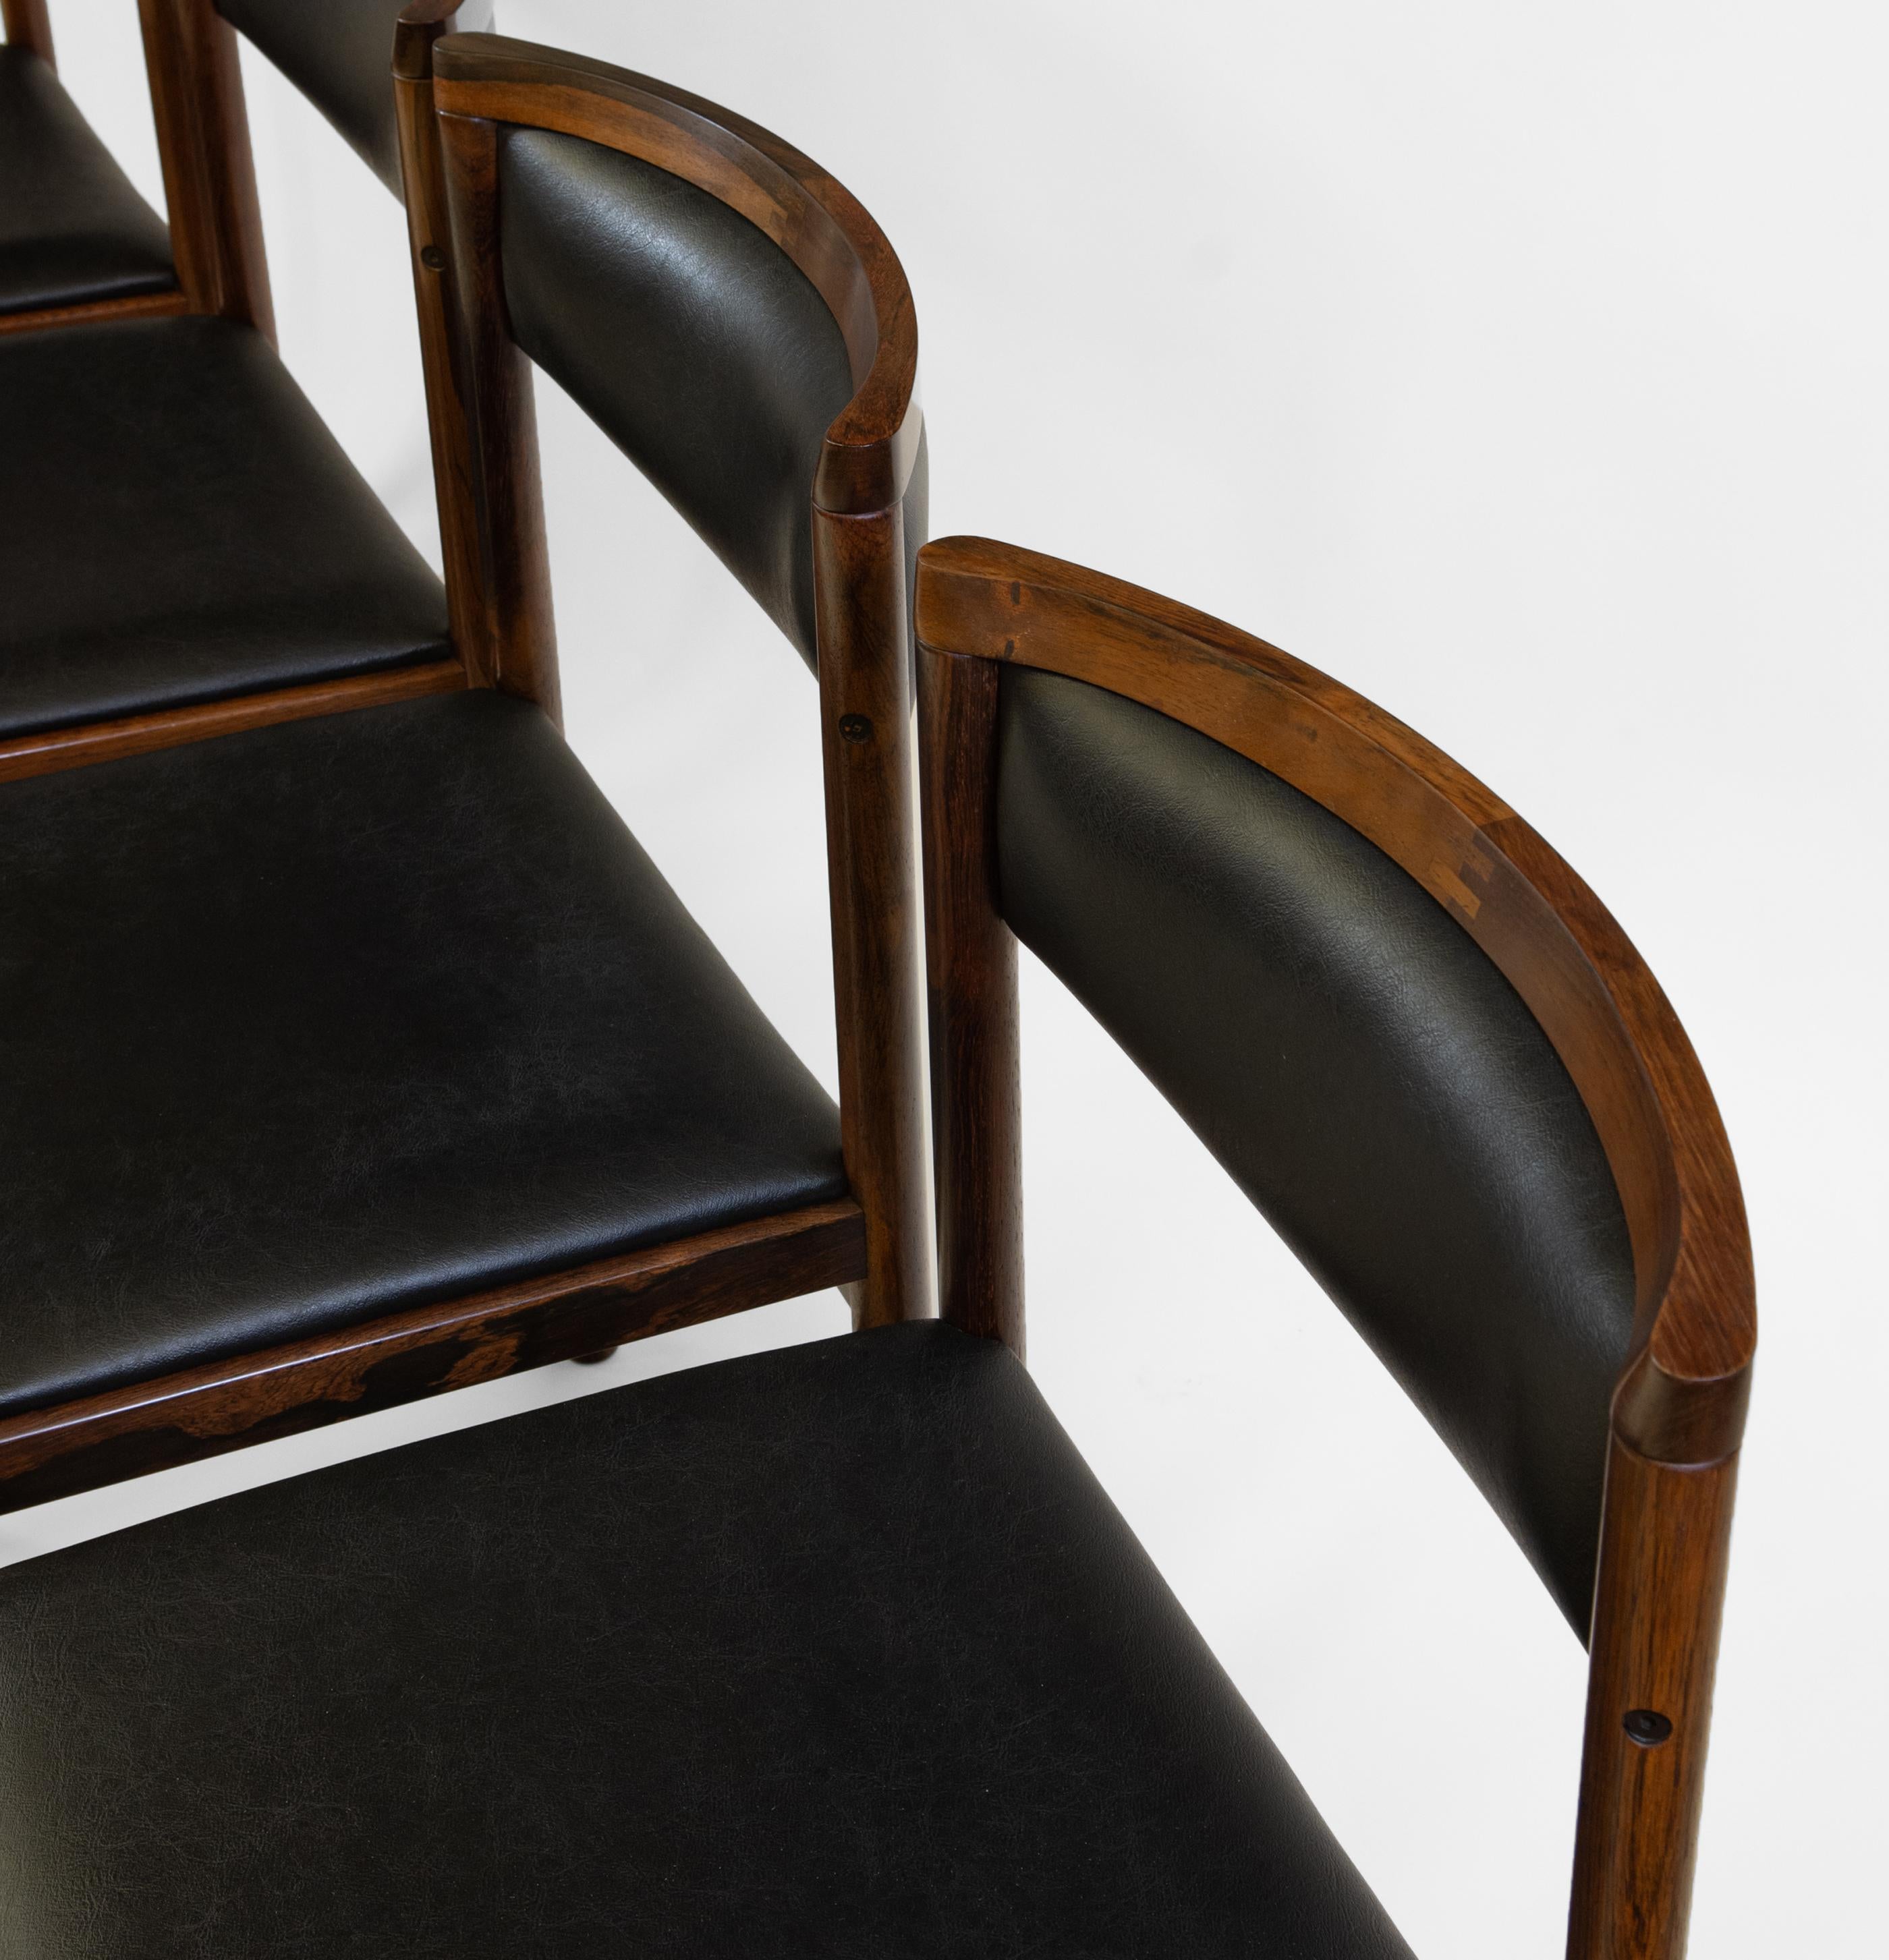 Mid century Danish set of four solid rosewood dining chairs with black textured vinyl seating by Saxkjøbing Savvaerk. Circa 1960. Stamped: SAX Made In Denmark.

Delivery is INCLUDED in the price for all areas in MAINLAND England & Wales. 

*CITES